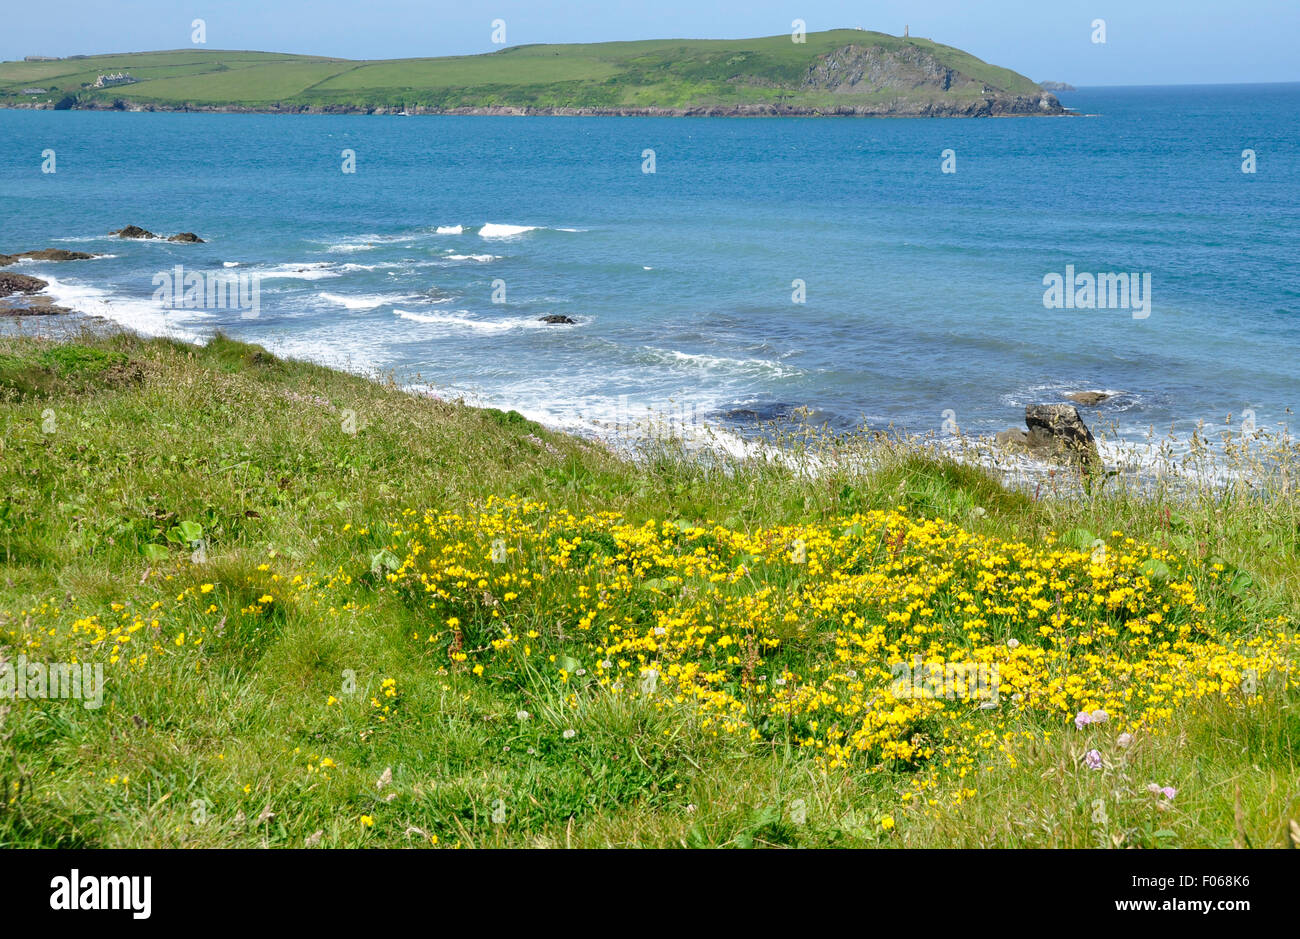 North Cornwall - coast path - view over cliff top wild flowers across Camel Estuary to Stepper Point - bright sunshine blue sky Stock Photo